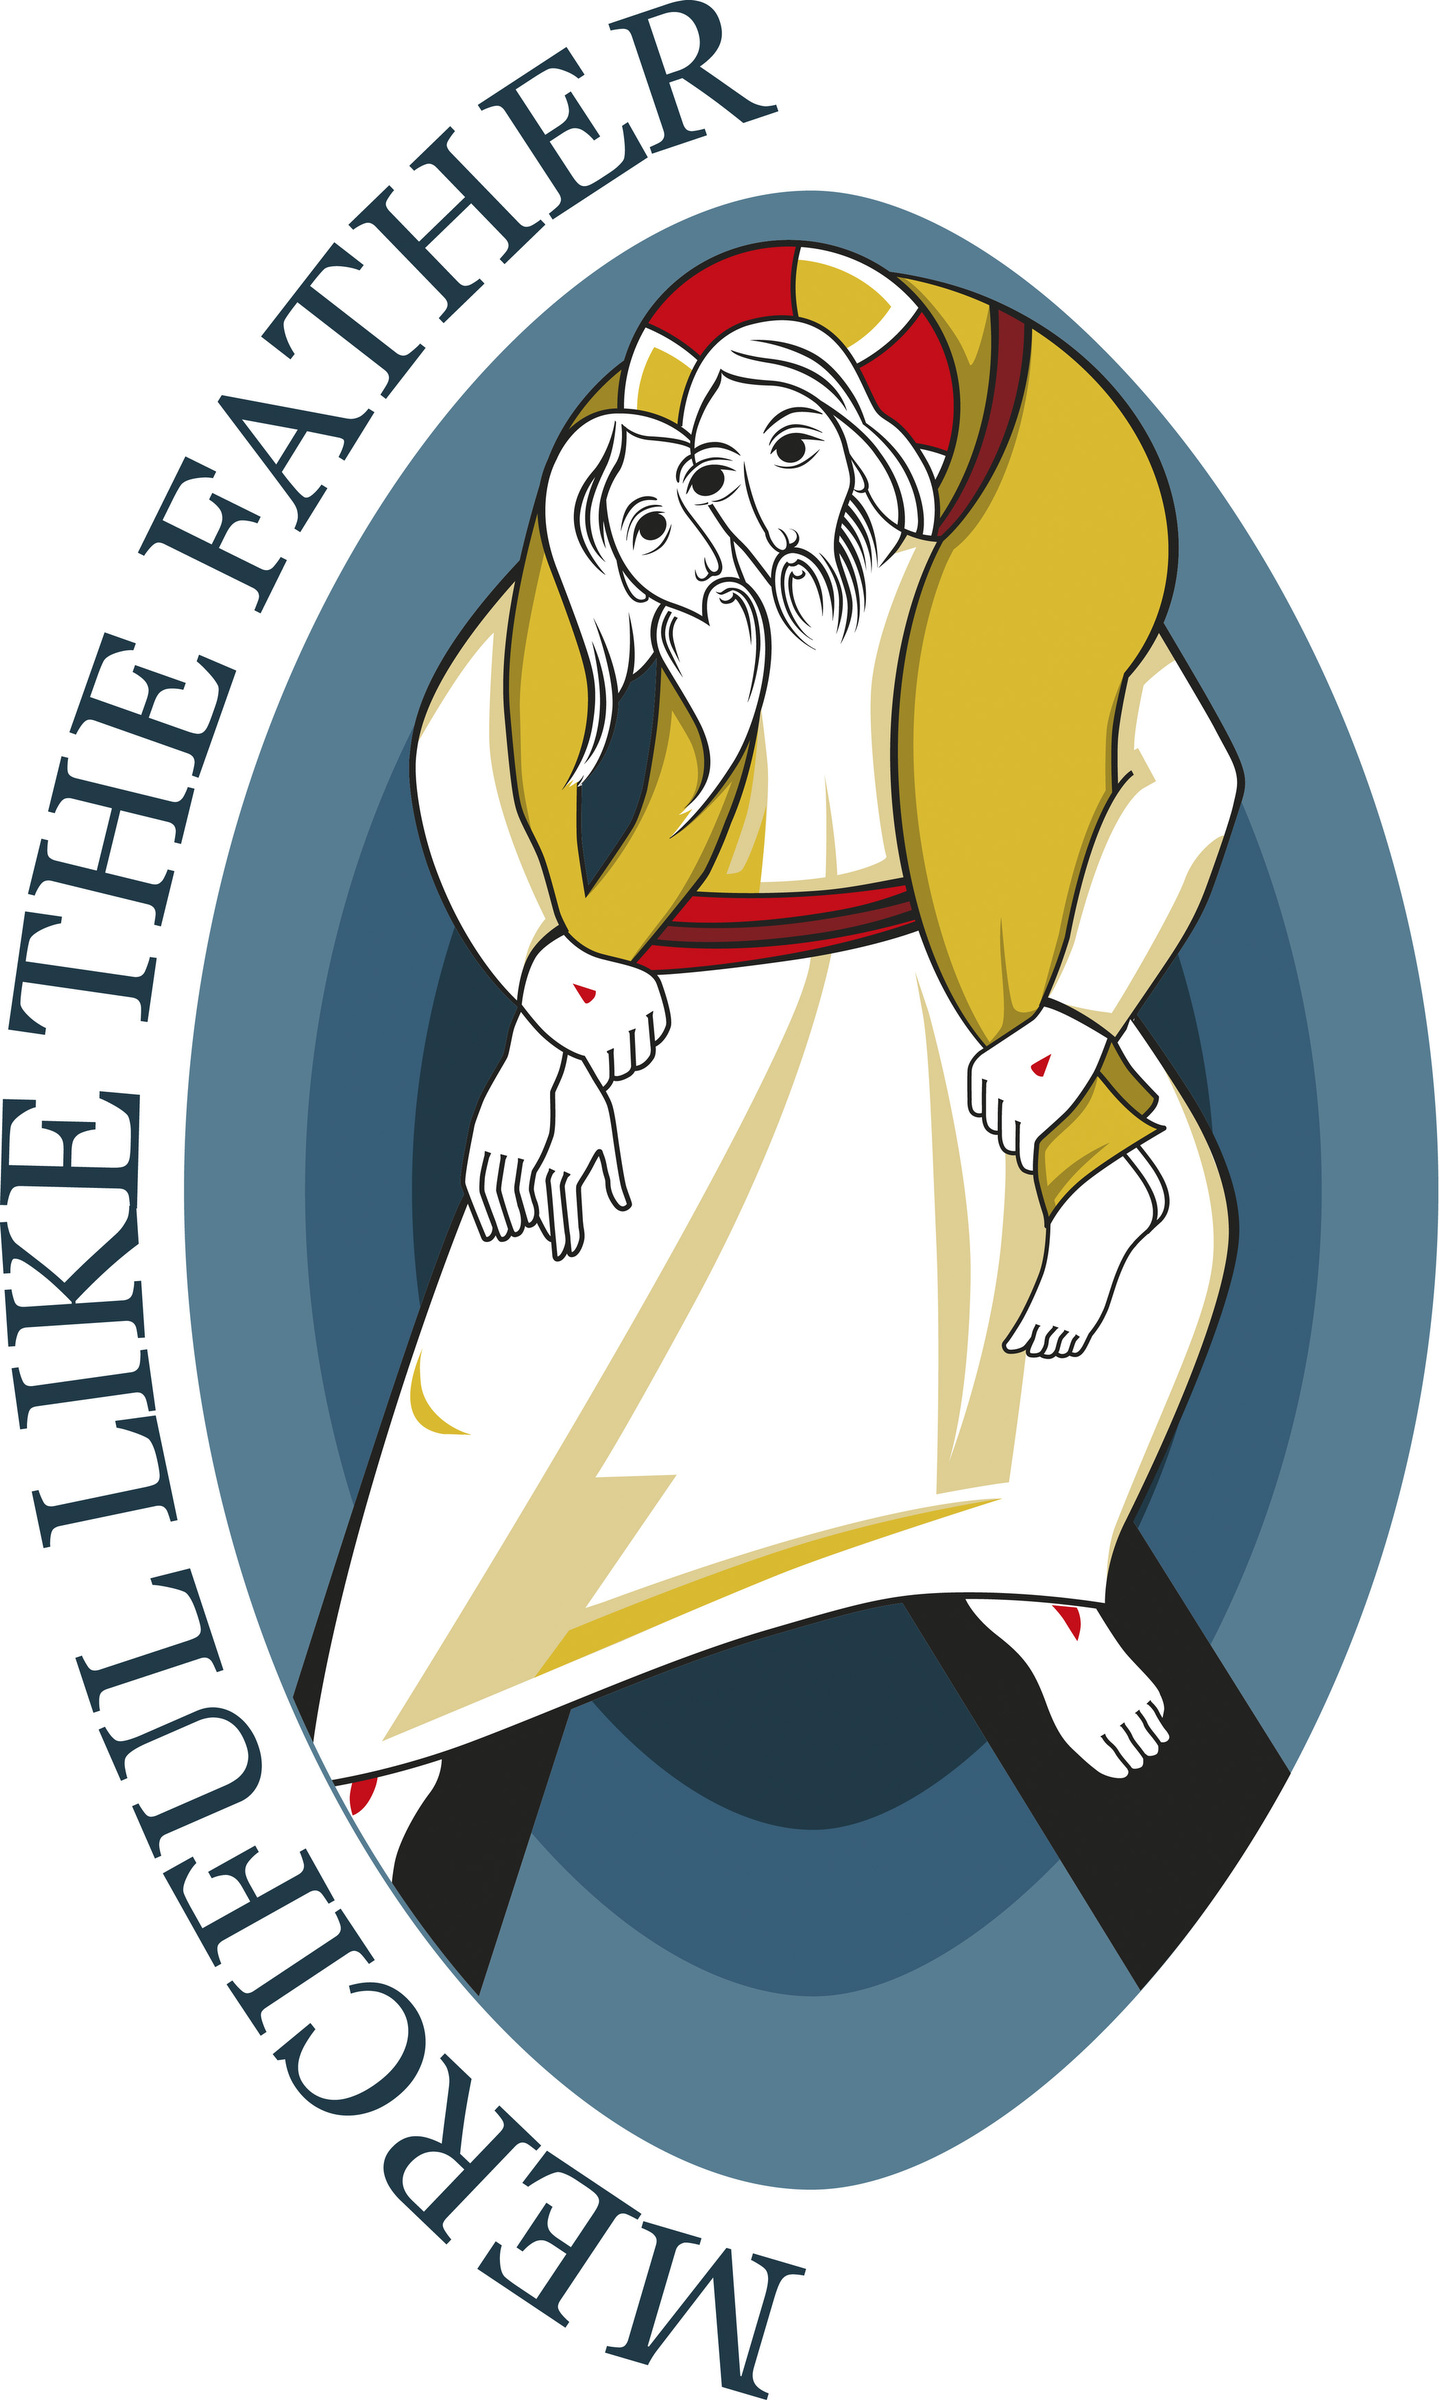 20150505cnsto0010 - Liturgical Resources for the Year of Mercy